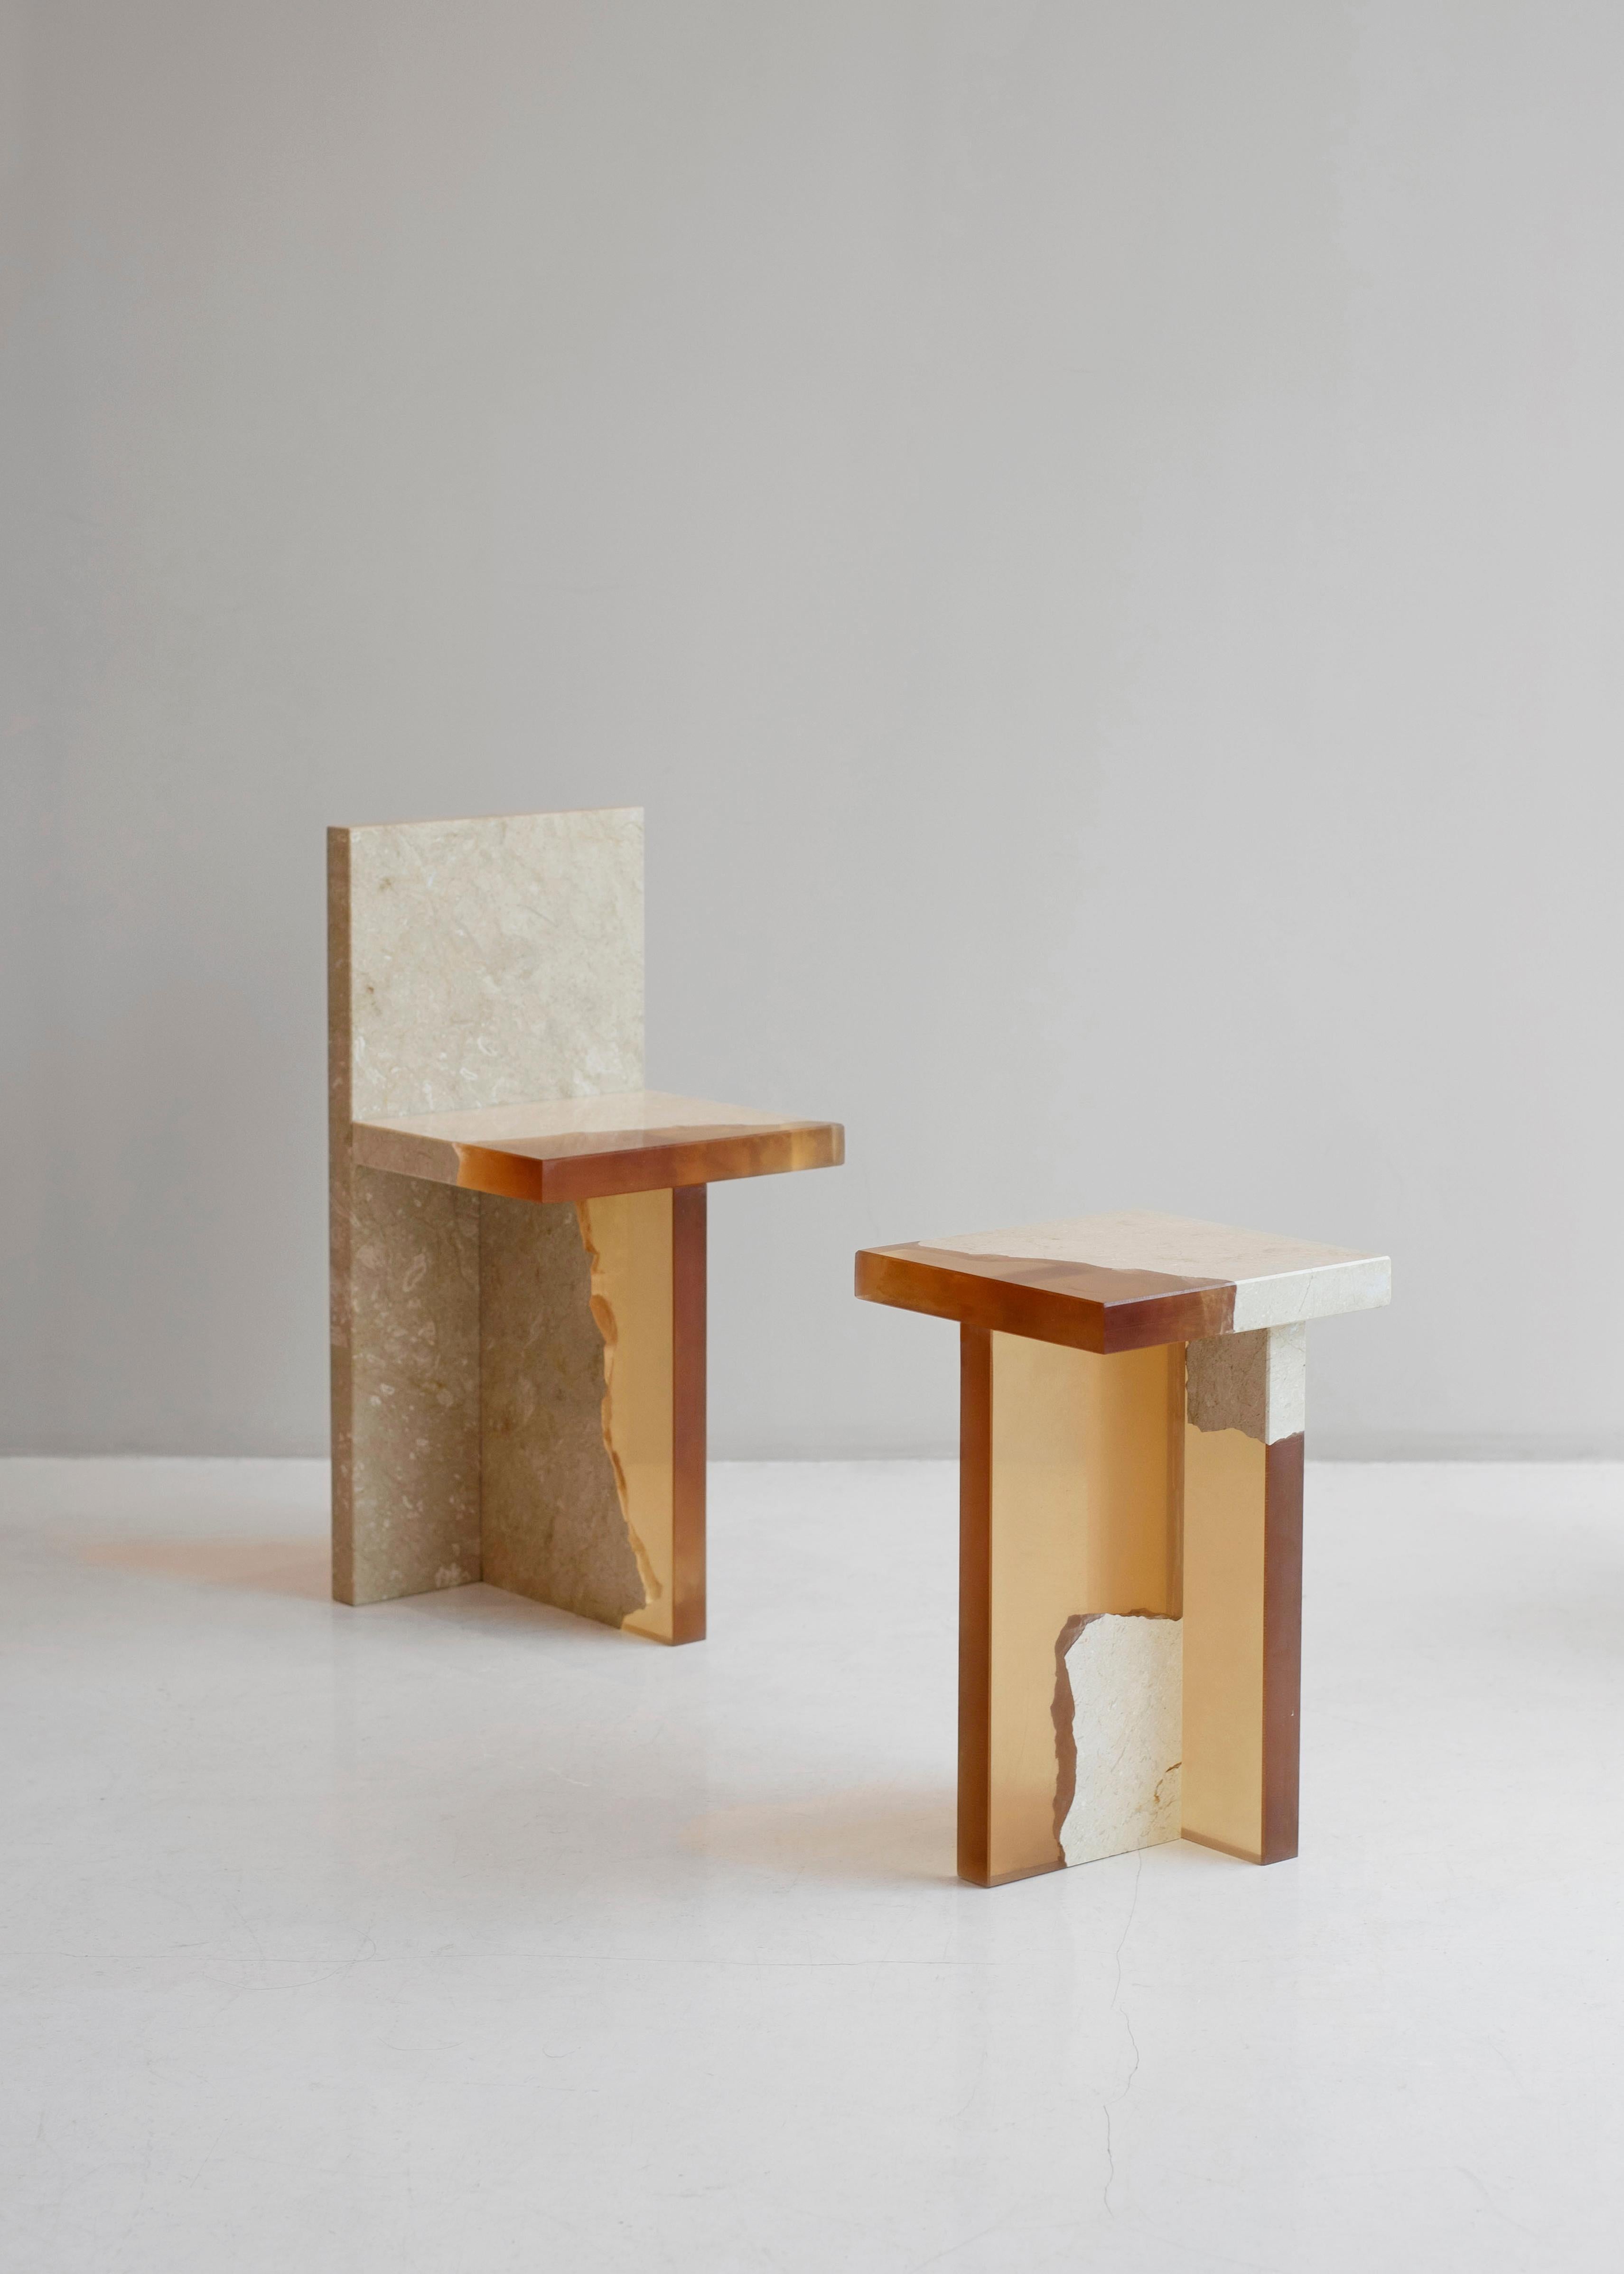 Organic Modern Crystal Resin and Marble, Fragment Chair, Jang Hea Kyoung